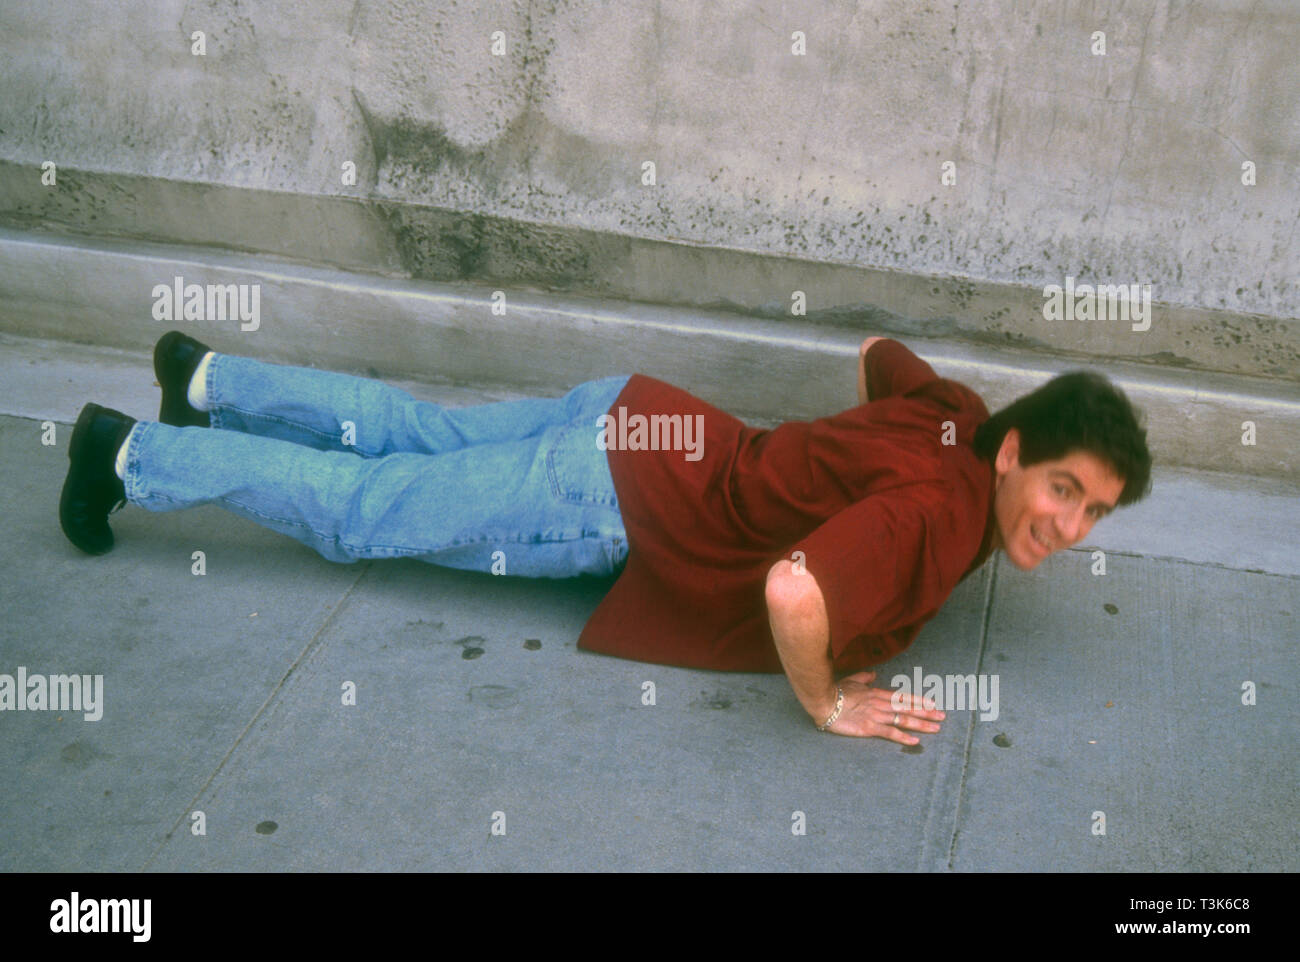 Los Angeles, California, USA 17th March 1994 (Exclusive) American Stand-up Comedian Carlos Alazraqui poses at a photo shoot on March 17, 1994 in Los Angeles, California, USA. Photo by Barry King/Alamy Stock Photo Stock Photo